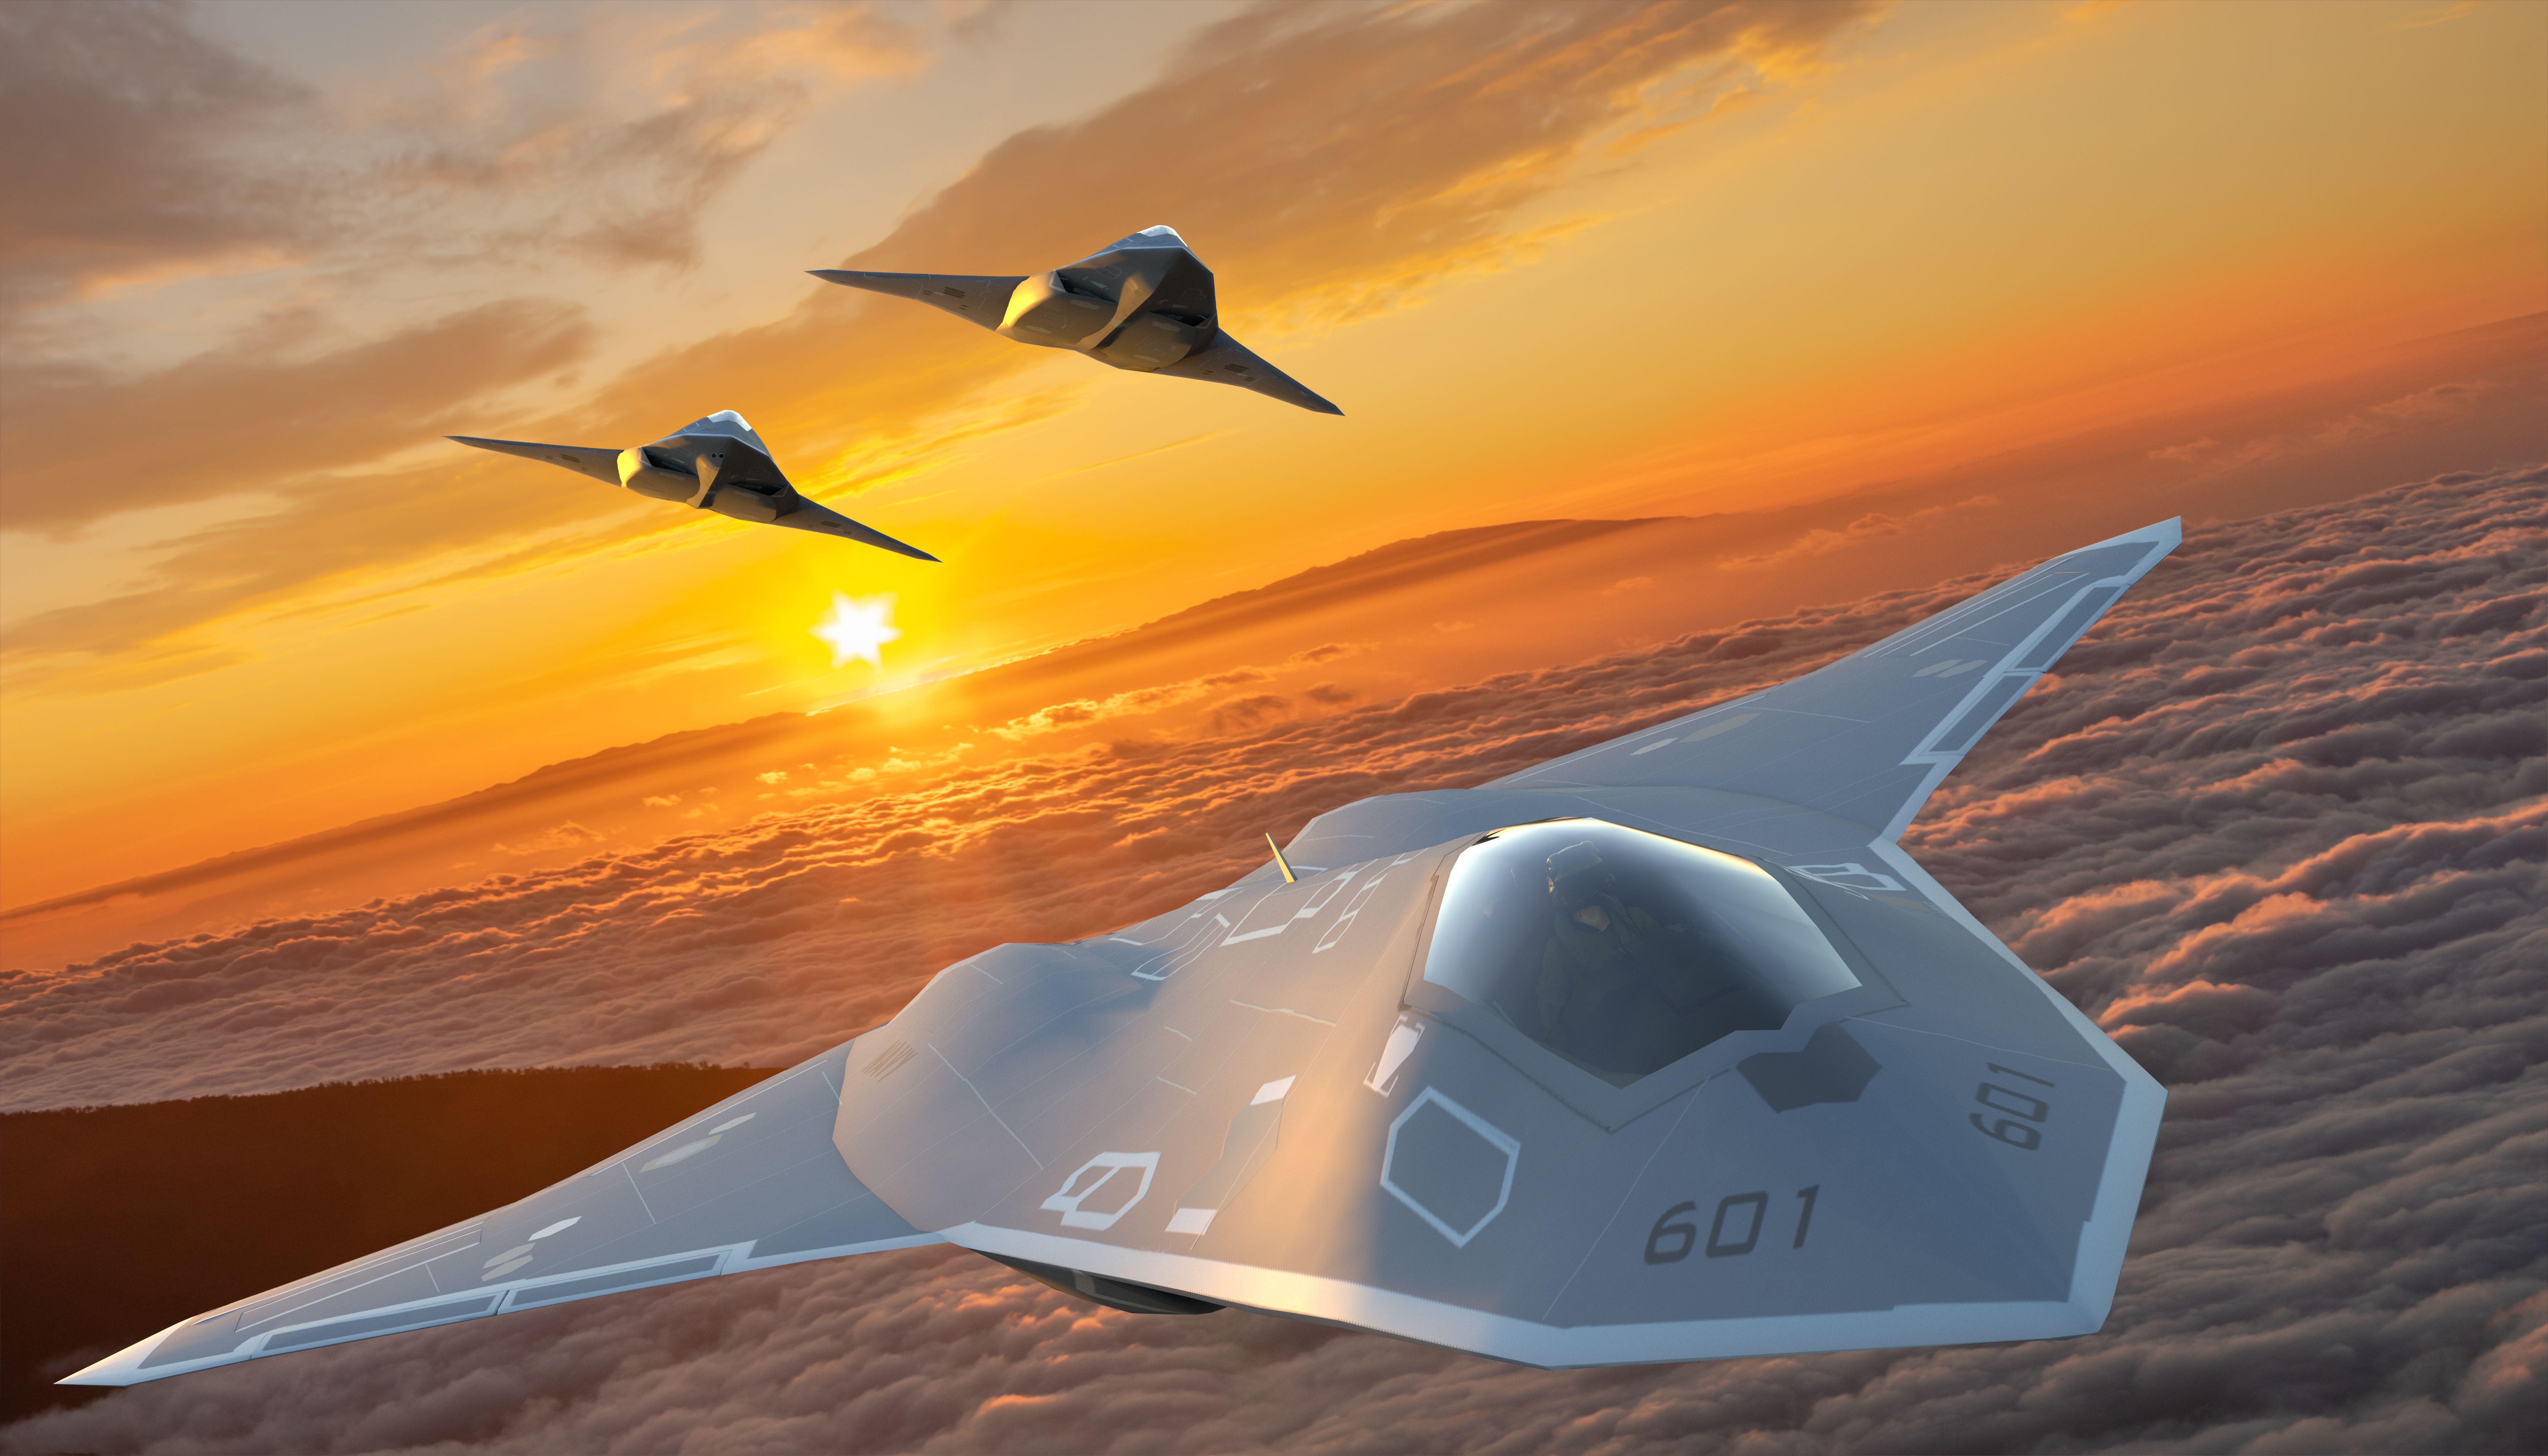 A render of three next generation fighter jets flying above the clouds.